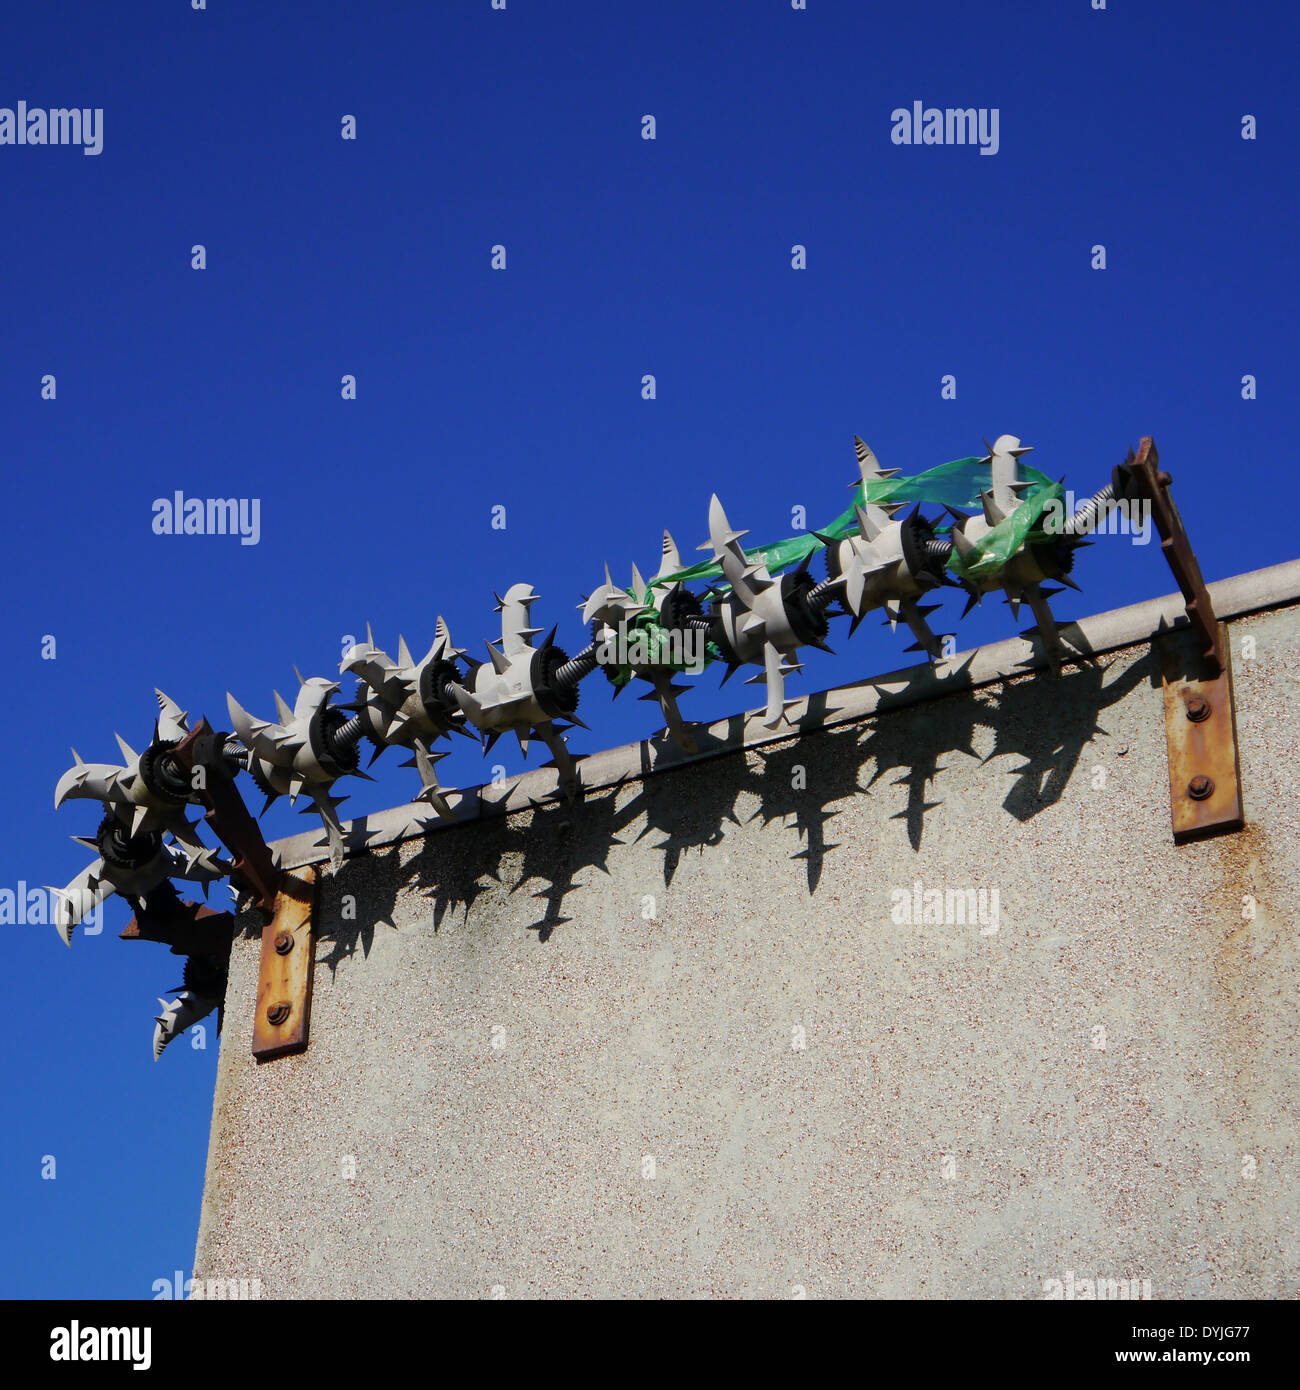 Cactus anti-burglary / theft / crime security / protection measures on a wall Stock Photo